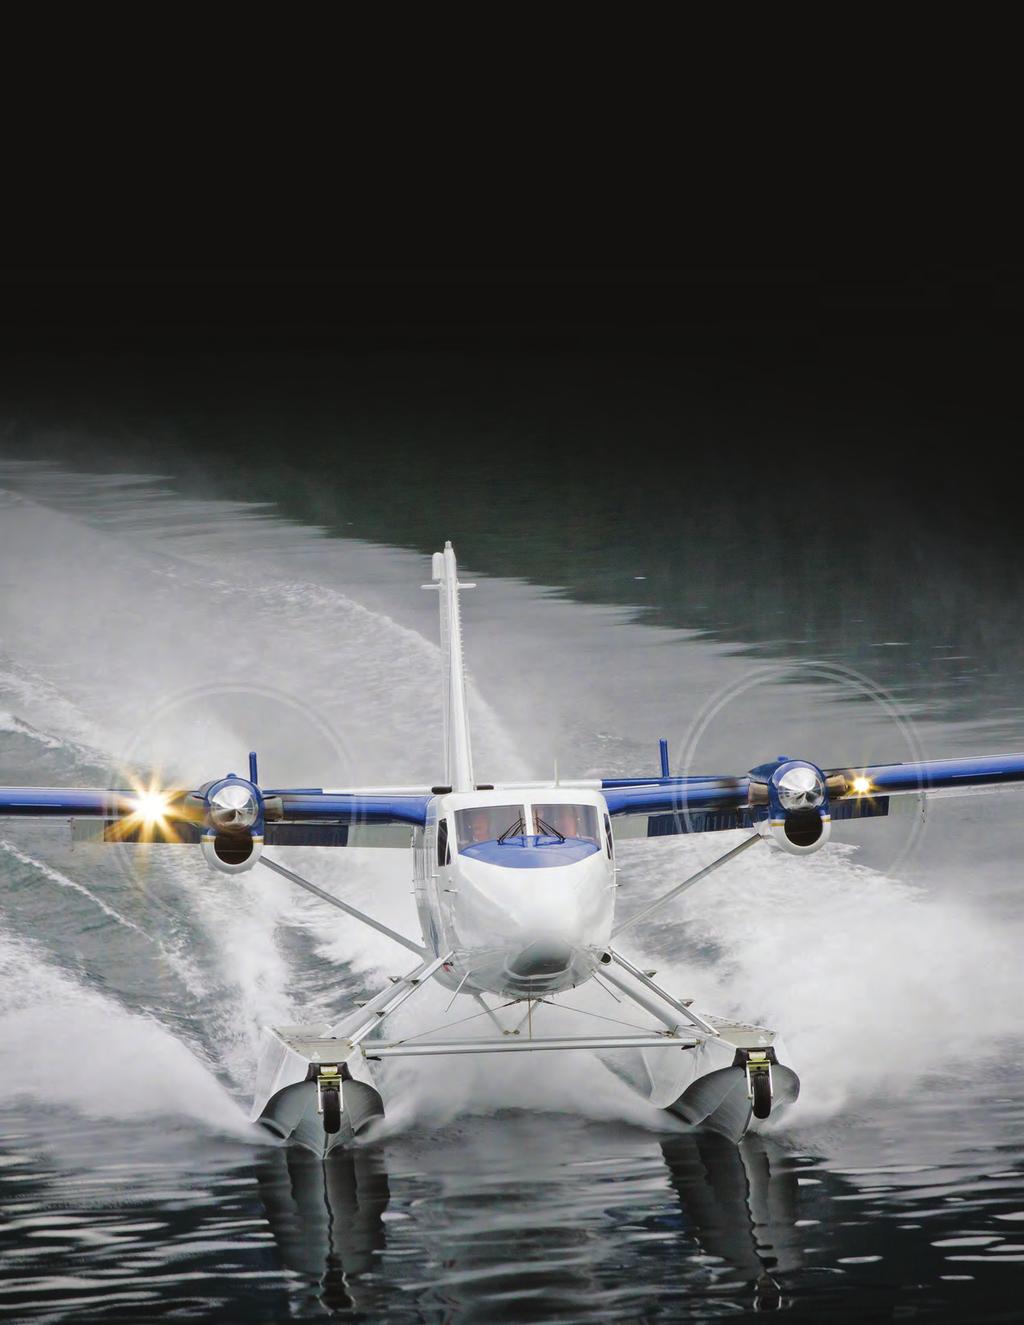 Seaplane System Total Weight: 1,452 lbs. / 659 kg. Seaplane Exchange Weight: 849 lbs. / 385 kg. Gross Weight: 12,500 lbs. / 5,670 kg. FLOAT DIMENSIONS Length: 32 5 / 9.88 m Height hull: 3 9 / 1.